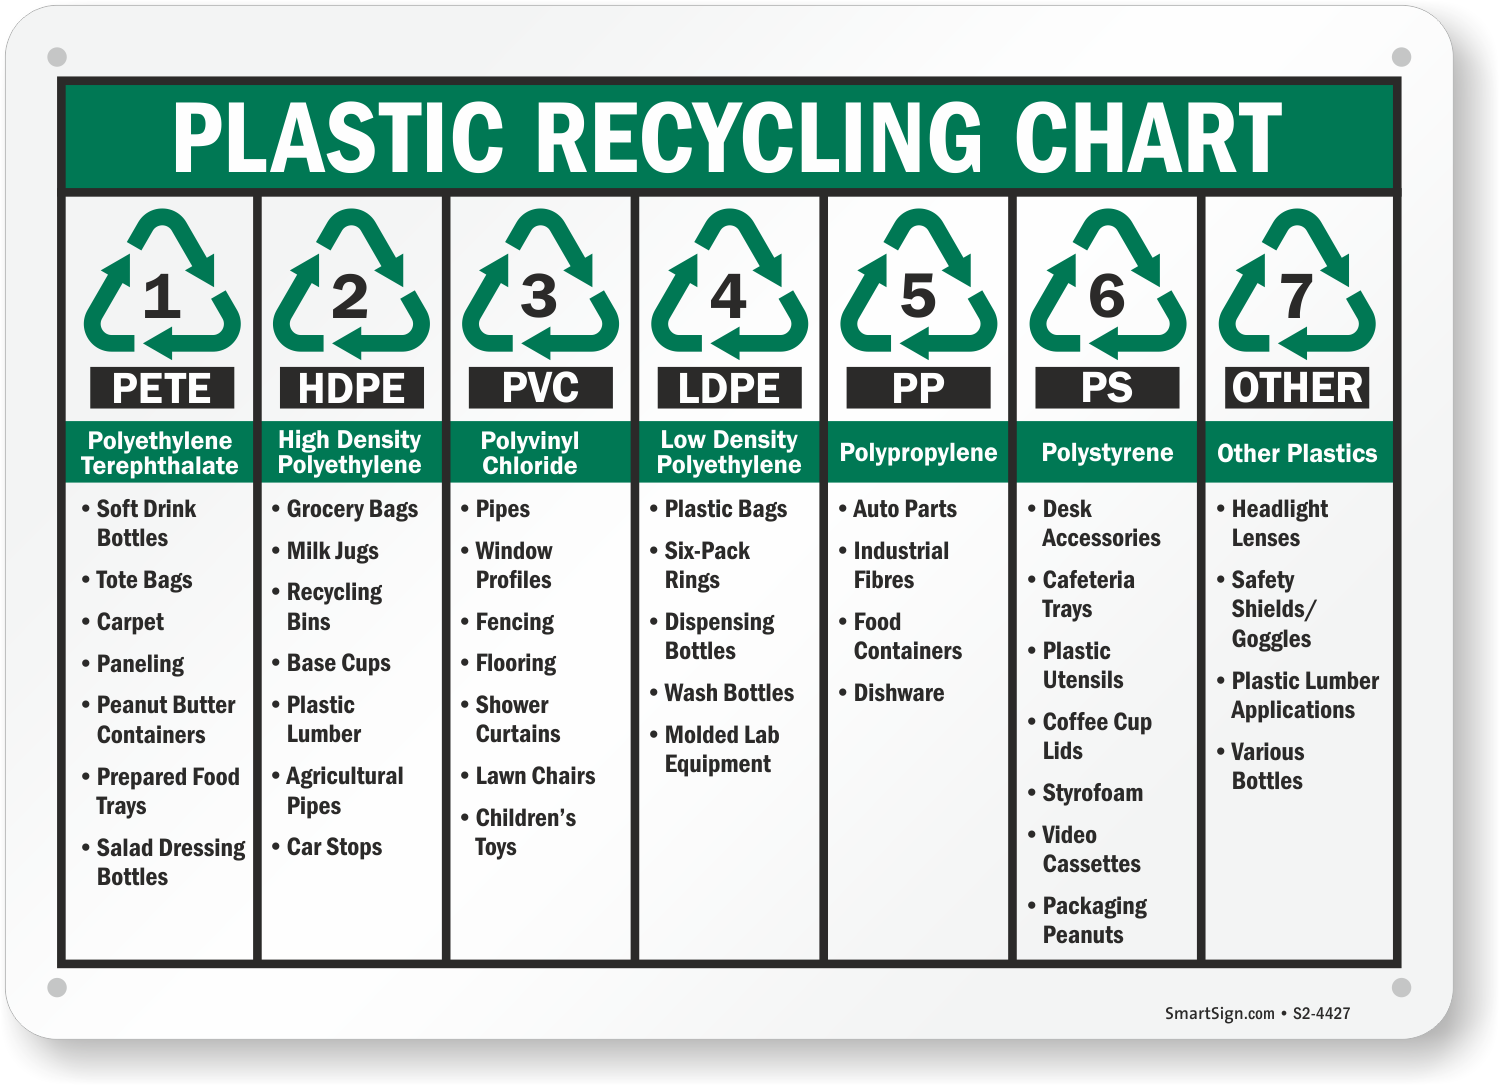 We should recycle. Recycling Plastic диаграмма. Recycling Chart.. Recycle диаграмма. Recycle Plastic.